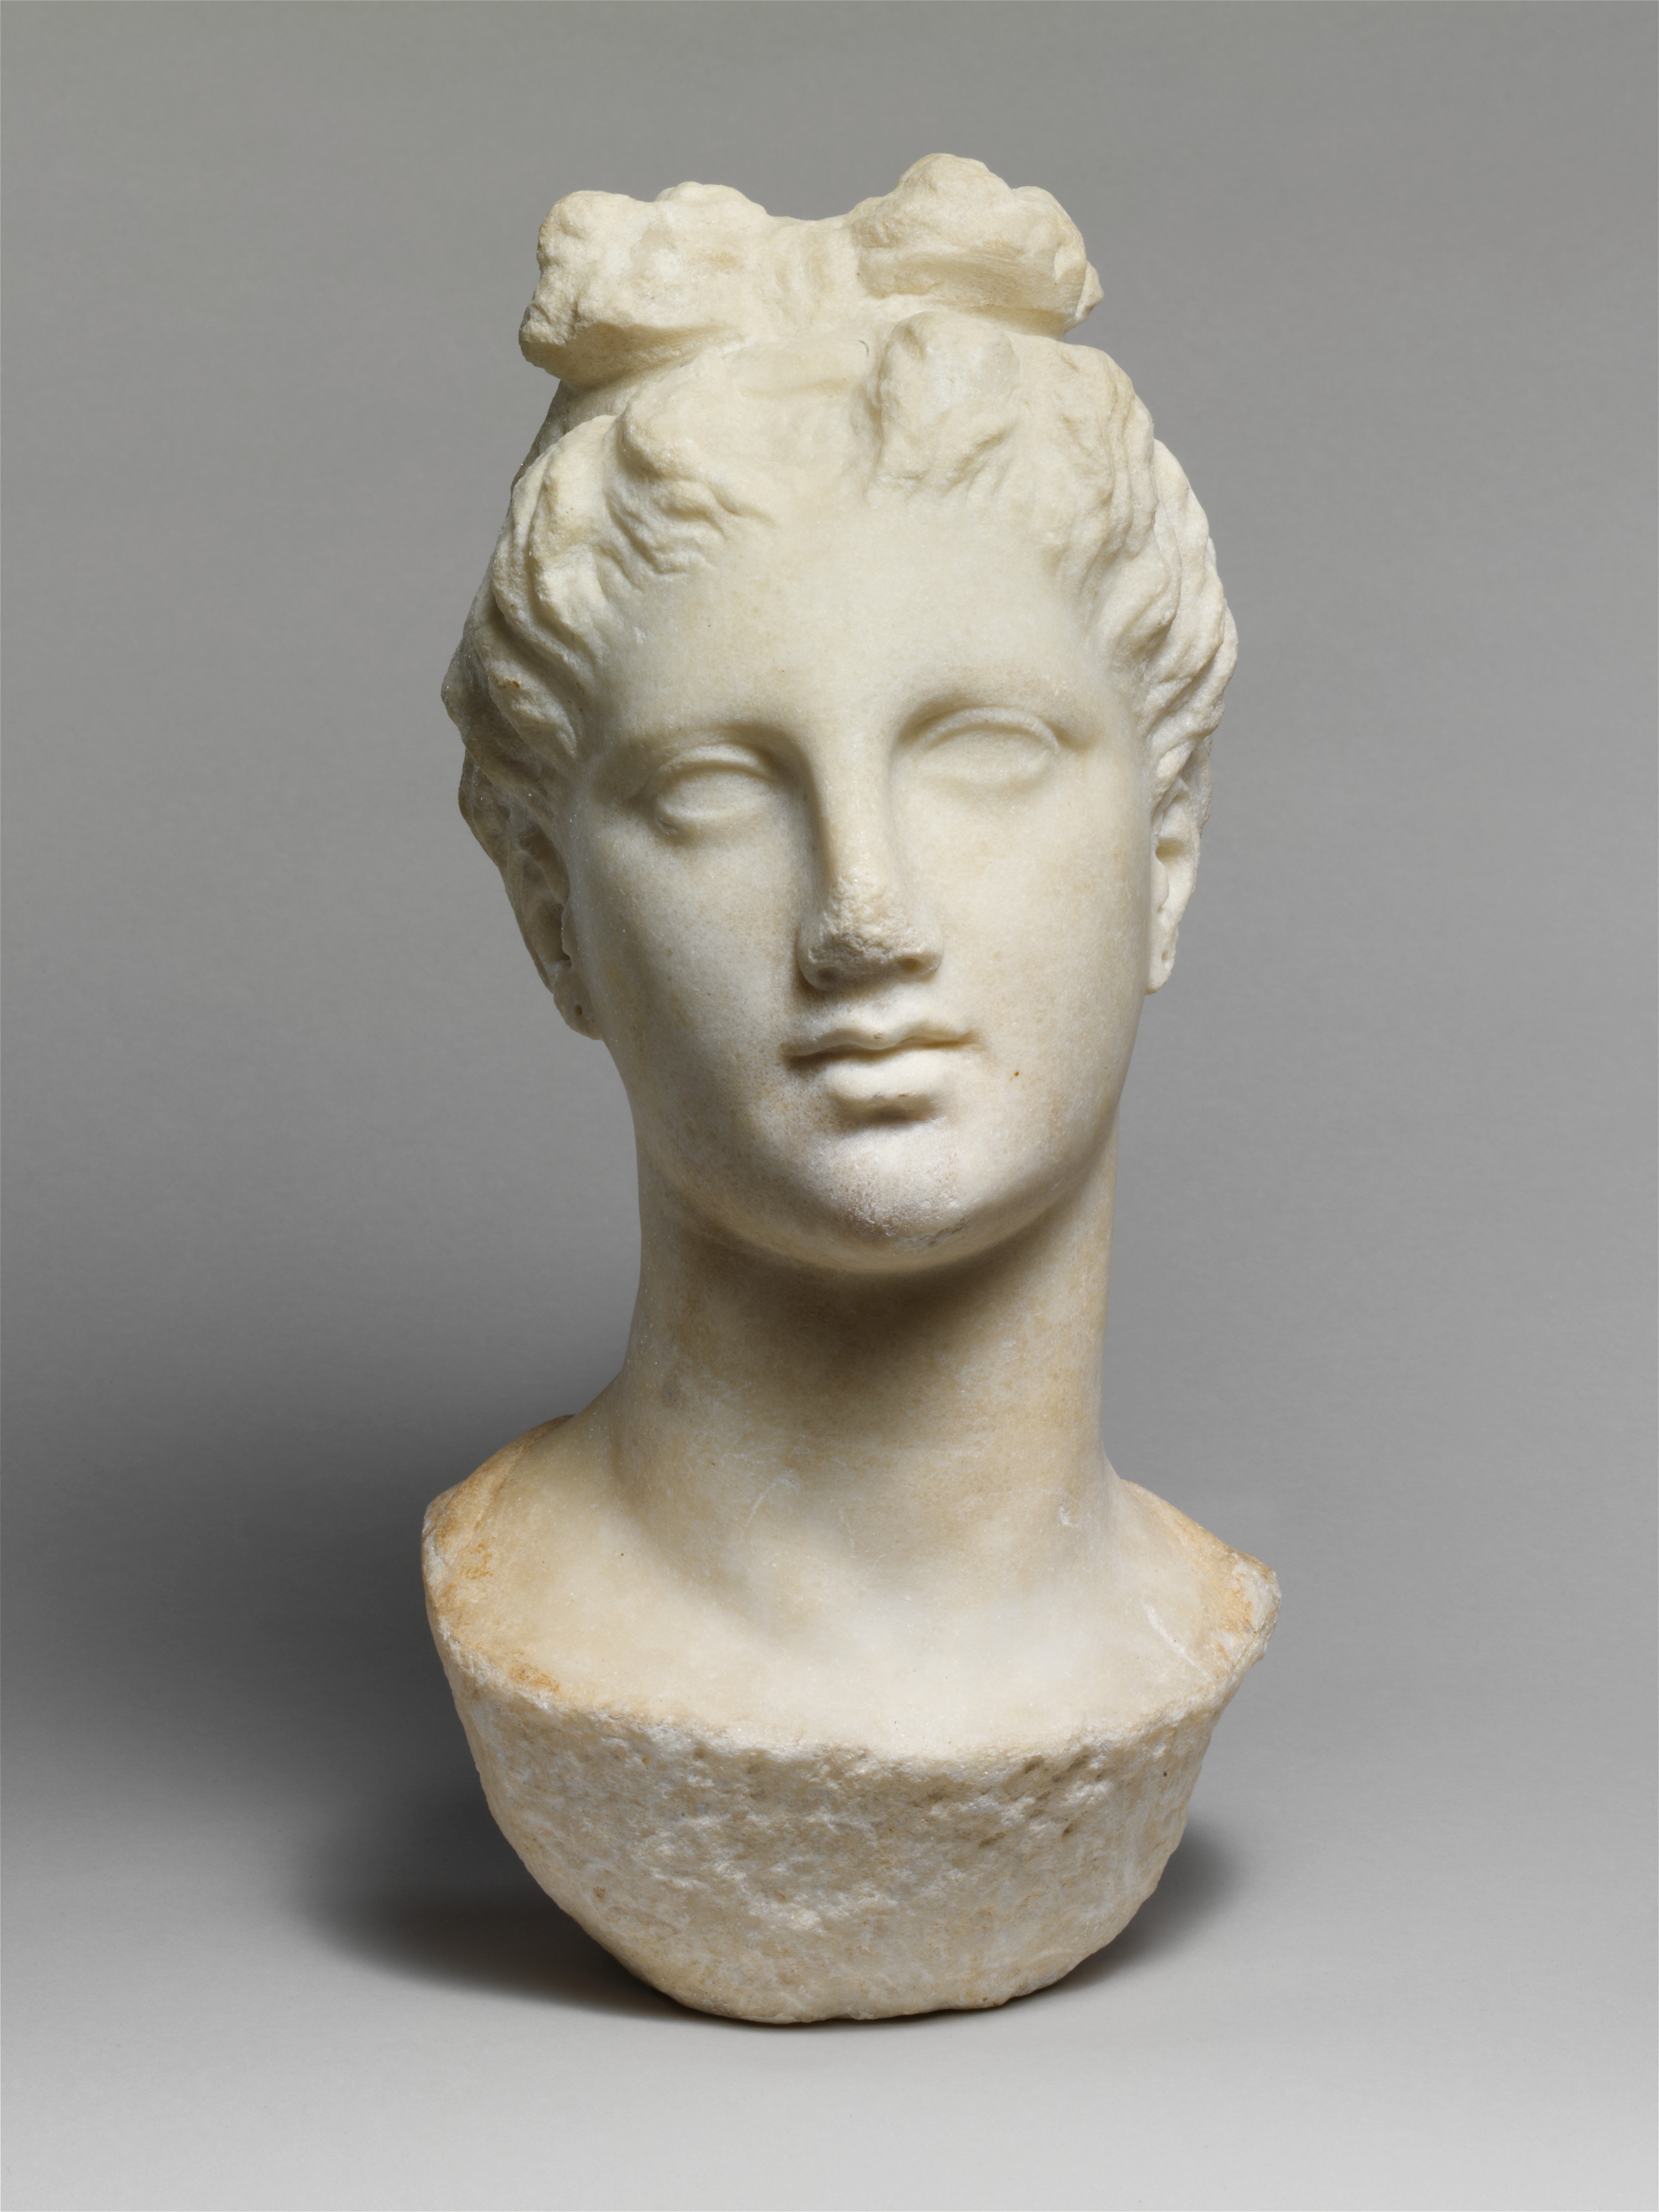 Marble head of a young woman from a funerary statue Greek, Attic